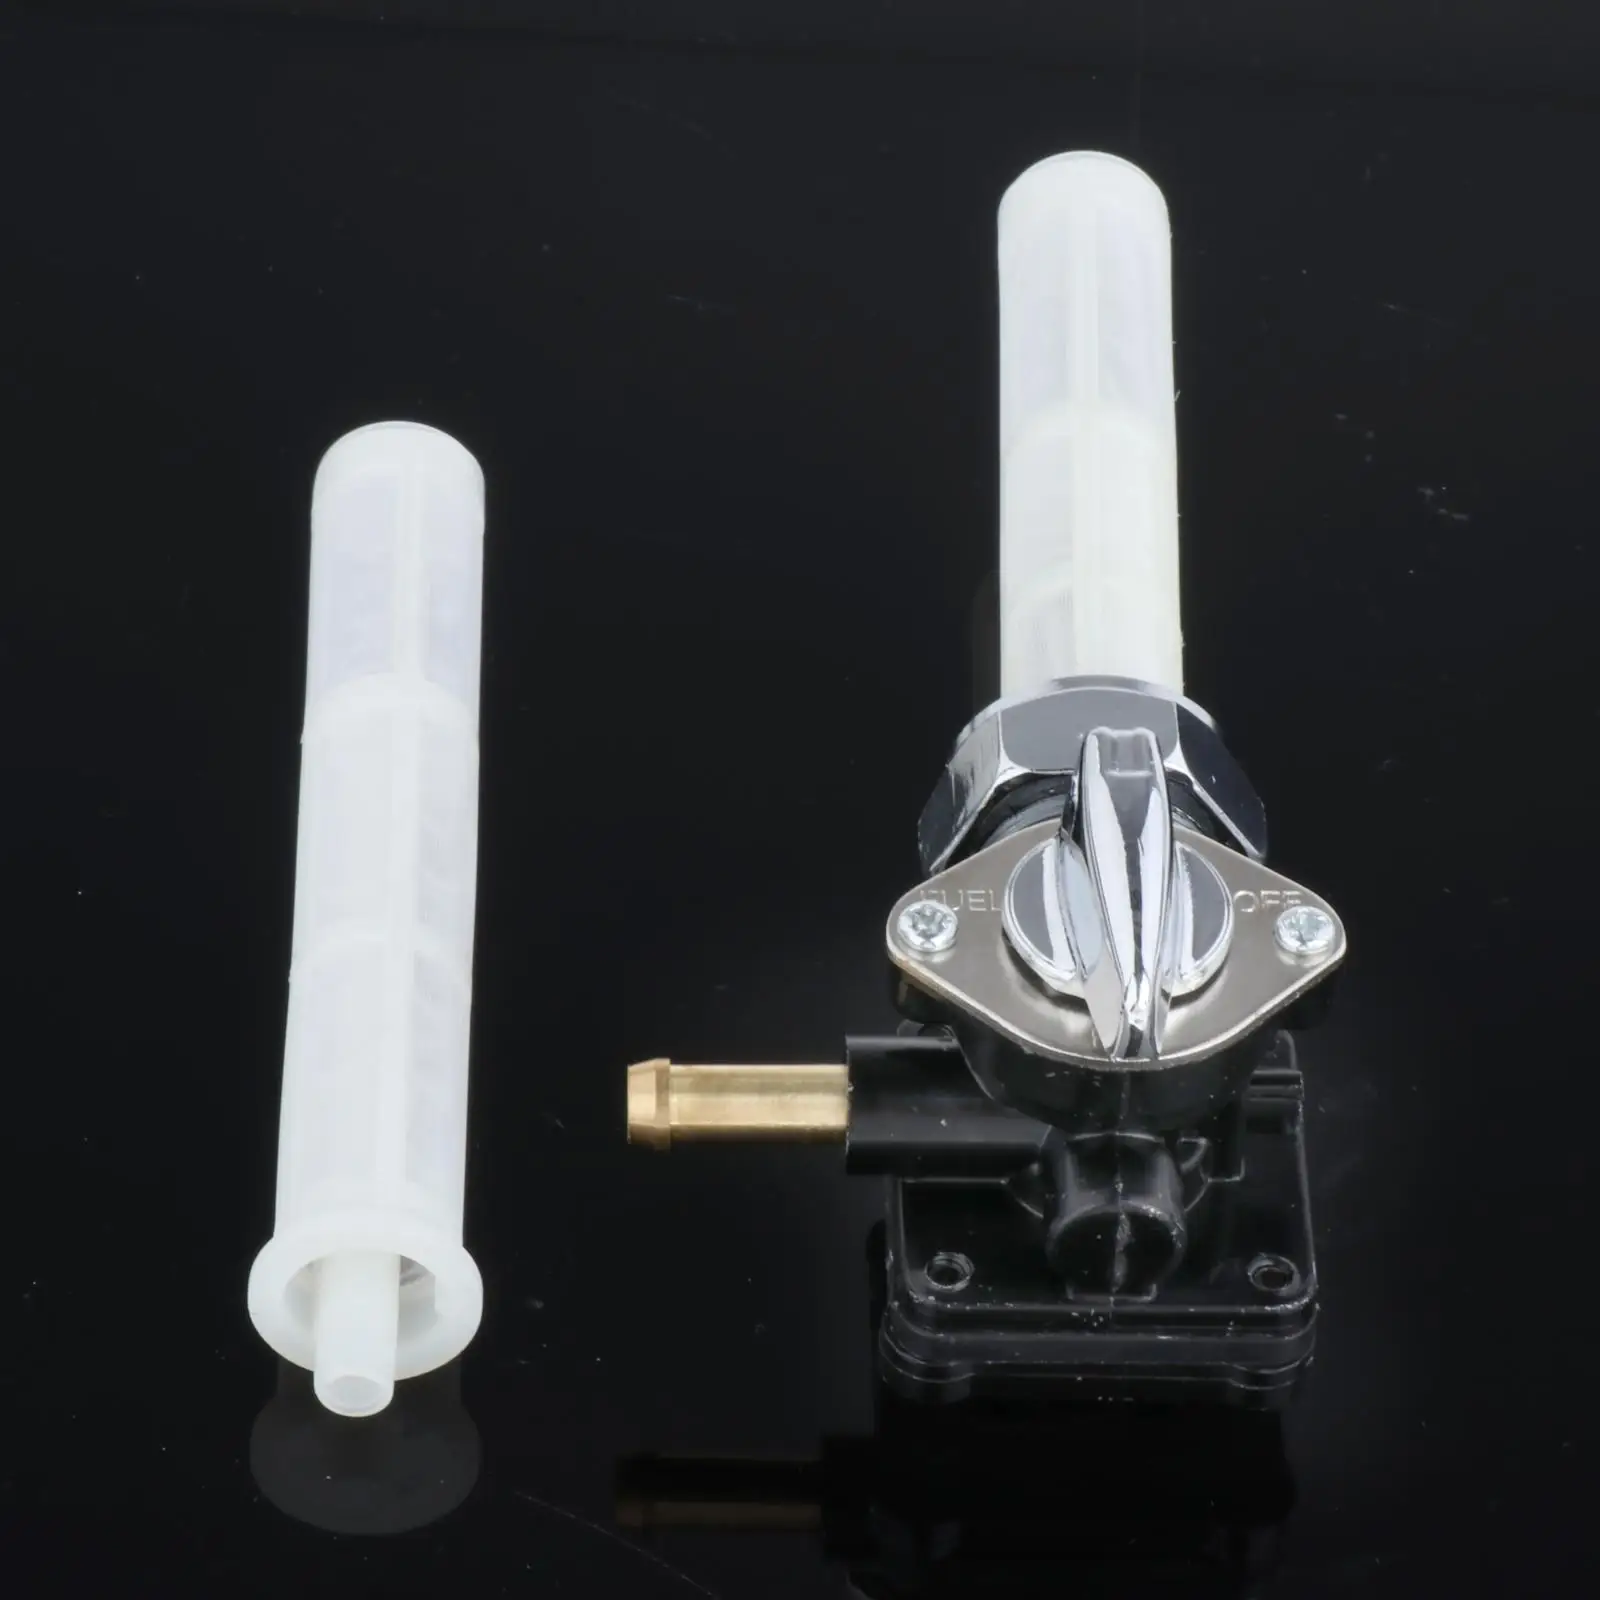 Fuel Switch Valve Petcock  with Filter Mesh 61338 Shut Off Switch for Flst Replacement  Supplies Parts